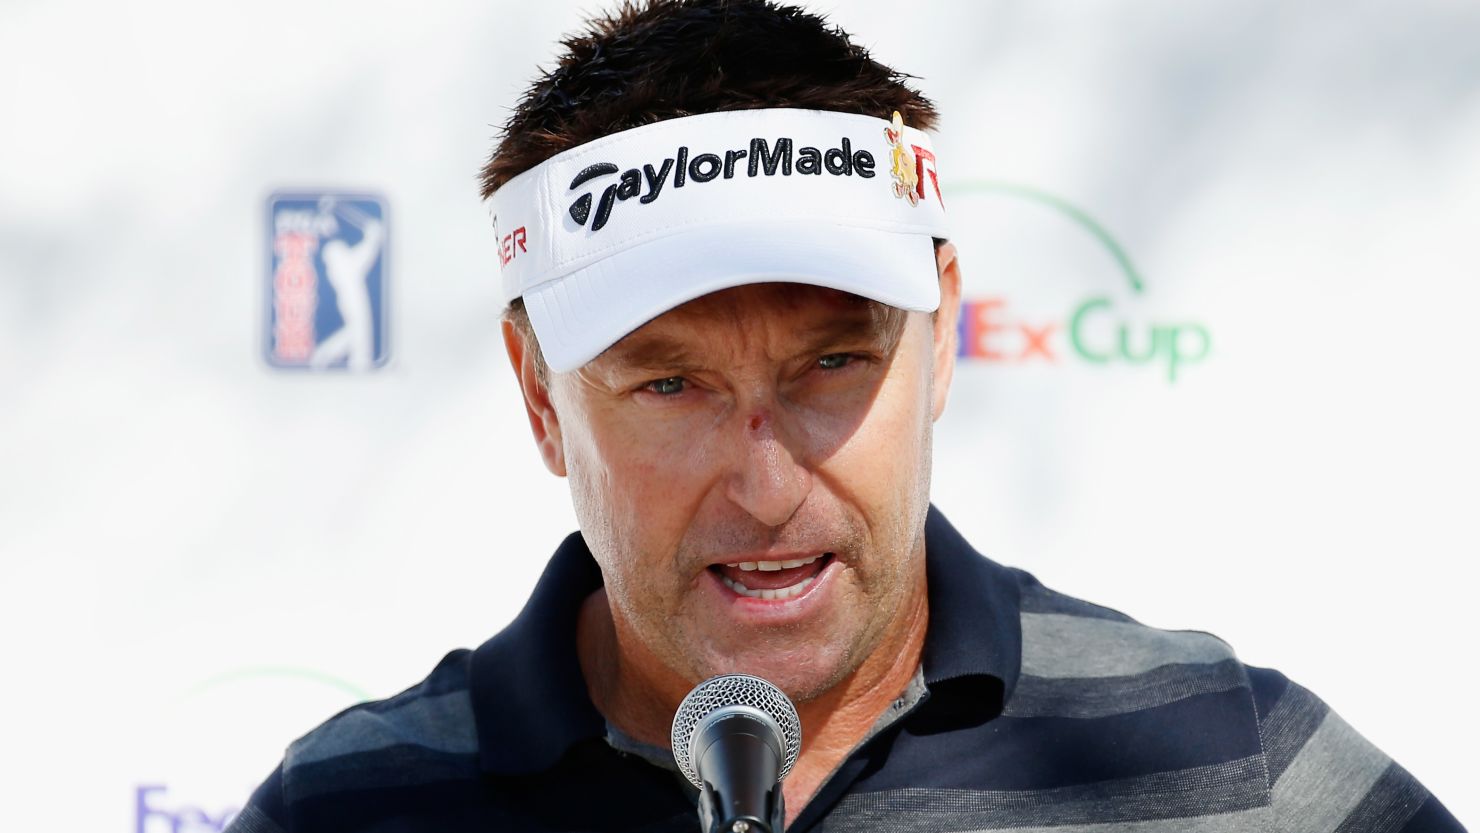 Robert Allenby is ranked 290th in the world and has won four titles on the PGA Tour.